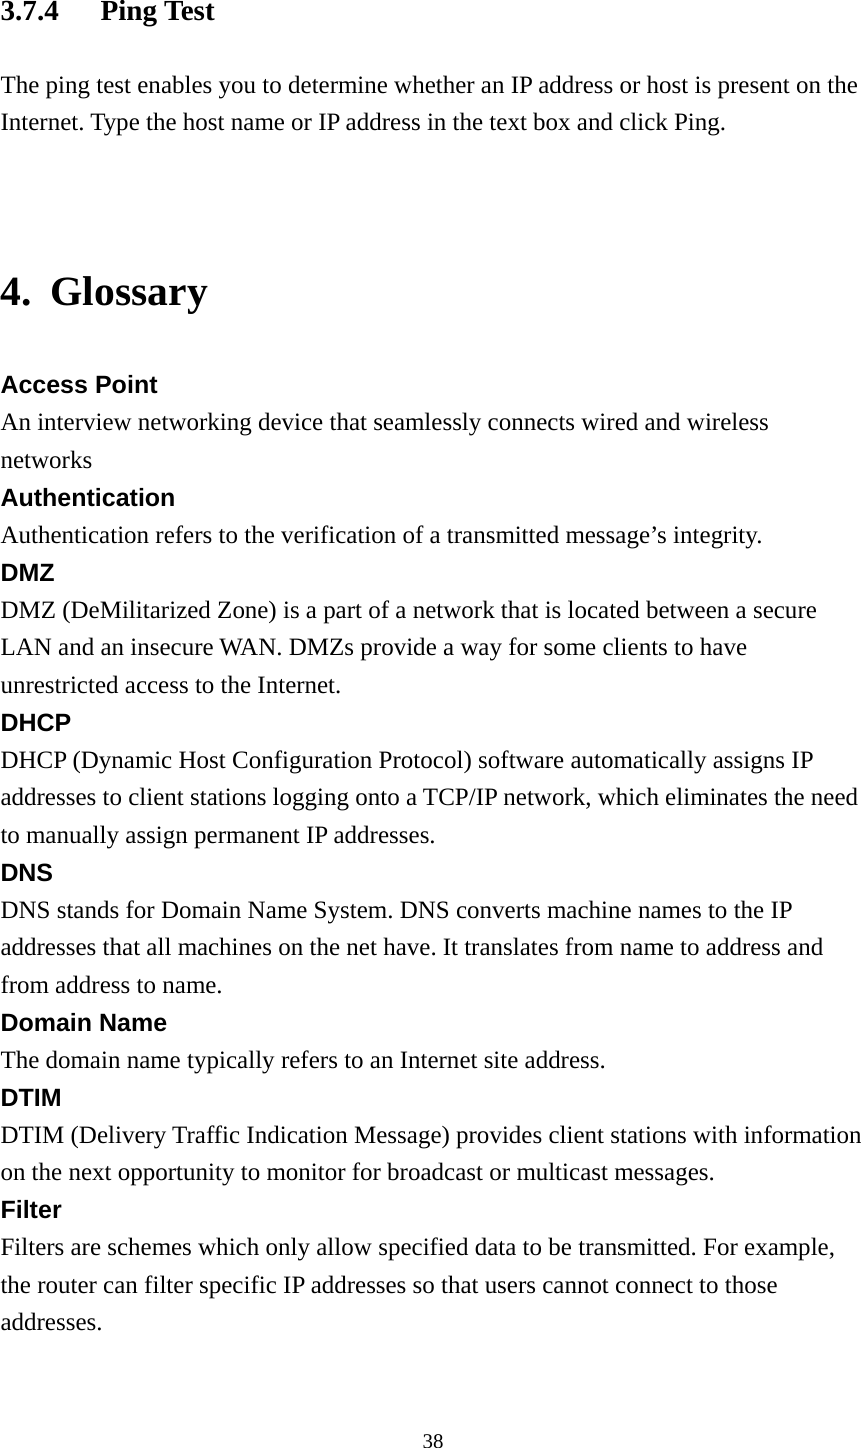 3.7.4 Ping Test The ping test enables you to determine whether an IP address or host is present on the Internet. Type the host name or IP address in the text box and click Ping.   4. Glossary Access Point An interview networking device that seamlessly connects wired and wireless networks Authentication Authentication refers to the verification of a transmitted message’s integrity. DMZ DMZ (DeMilitarized Zone) is a part of a network that is located between a secure LAN and an insecure WAN. DMZs provide a way for some clients to have unrestricted access to the Internet. DHCP DHCP (Dynamic Host Configuration Protocol) software automatically assigns IP addresses to client stations logging onto a TCP/IP network, which eliminates the need to manually assign permanent IP addresses. DNS DNS stands for Domain Name System. DNS converts machine names to the IP addresses that all machines on the net have. It translates from name to address and from address to name. Domain Name The domain name typically refers to an Internet site address. DTIM DTIM (Delivery Traffic Indication Message) provides client stations with information on the next opportunity to monitor for broadcast or multicast messages. Filter Filters are schemes which only allow specified data to be transmitted. For example, the router can filter specific IP addresses so that users cannot connect to those addresses.  38